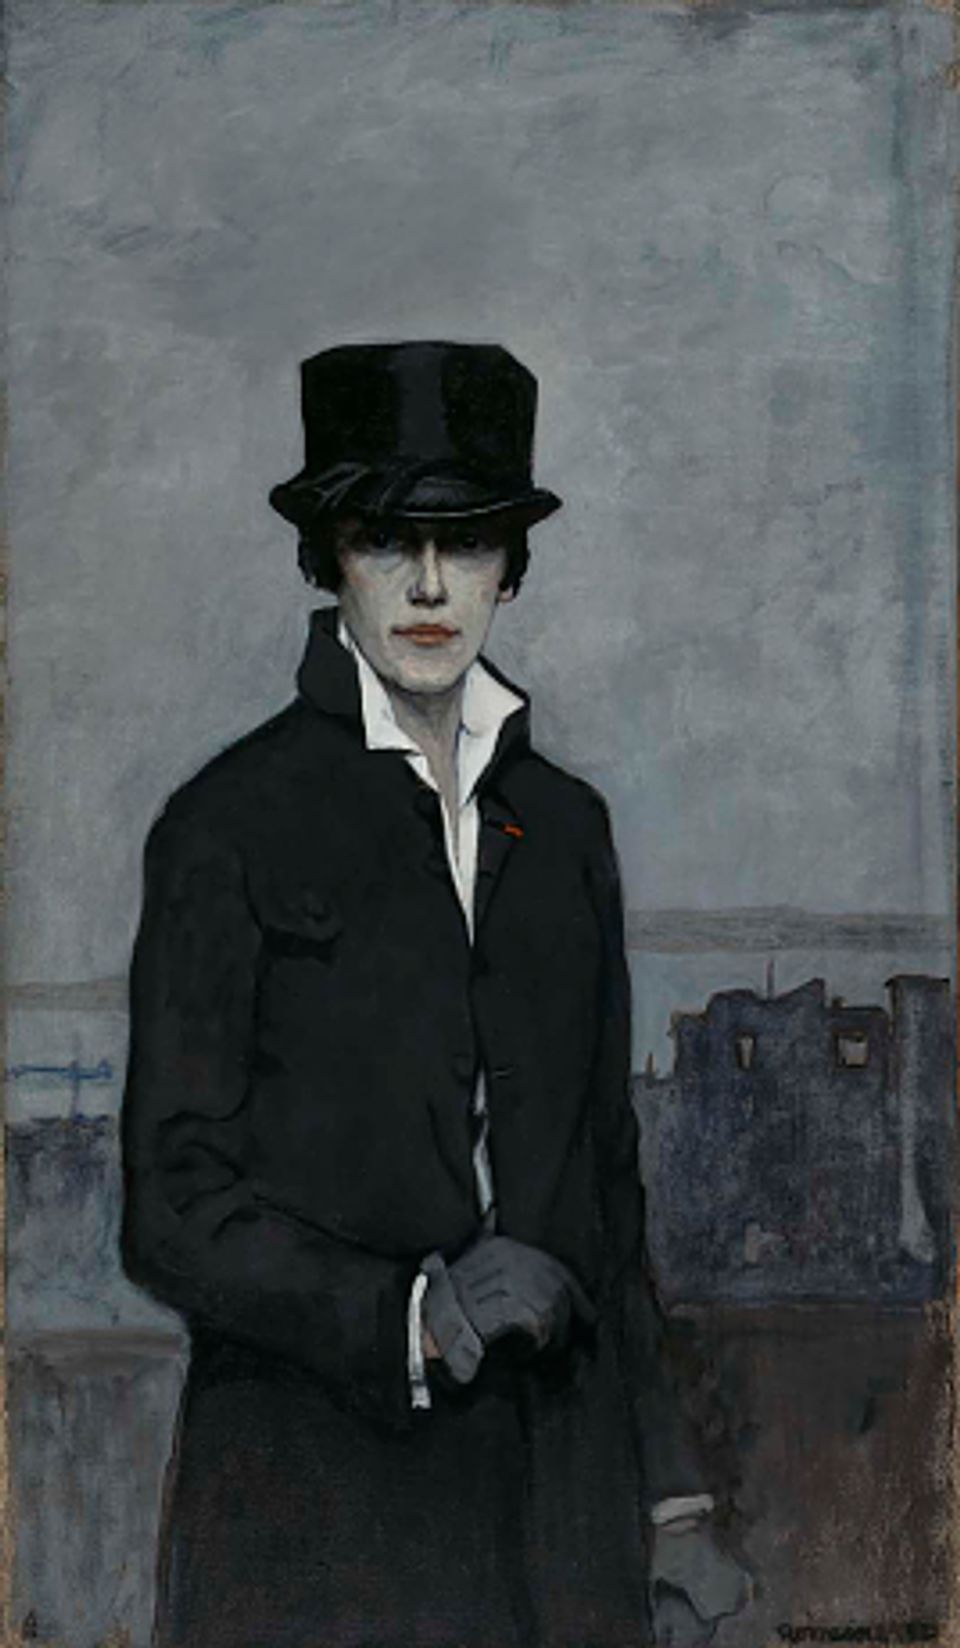 A photograph of a man in a black suit and hat against a gray background, part of the exhibition "The Art of Romaine Brooks"